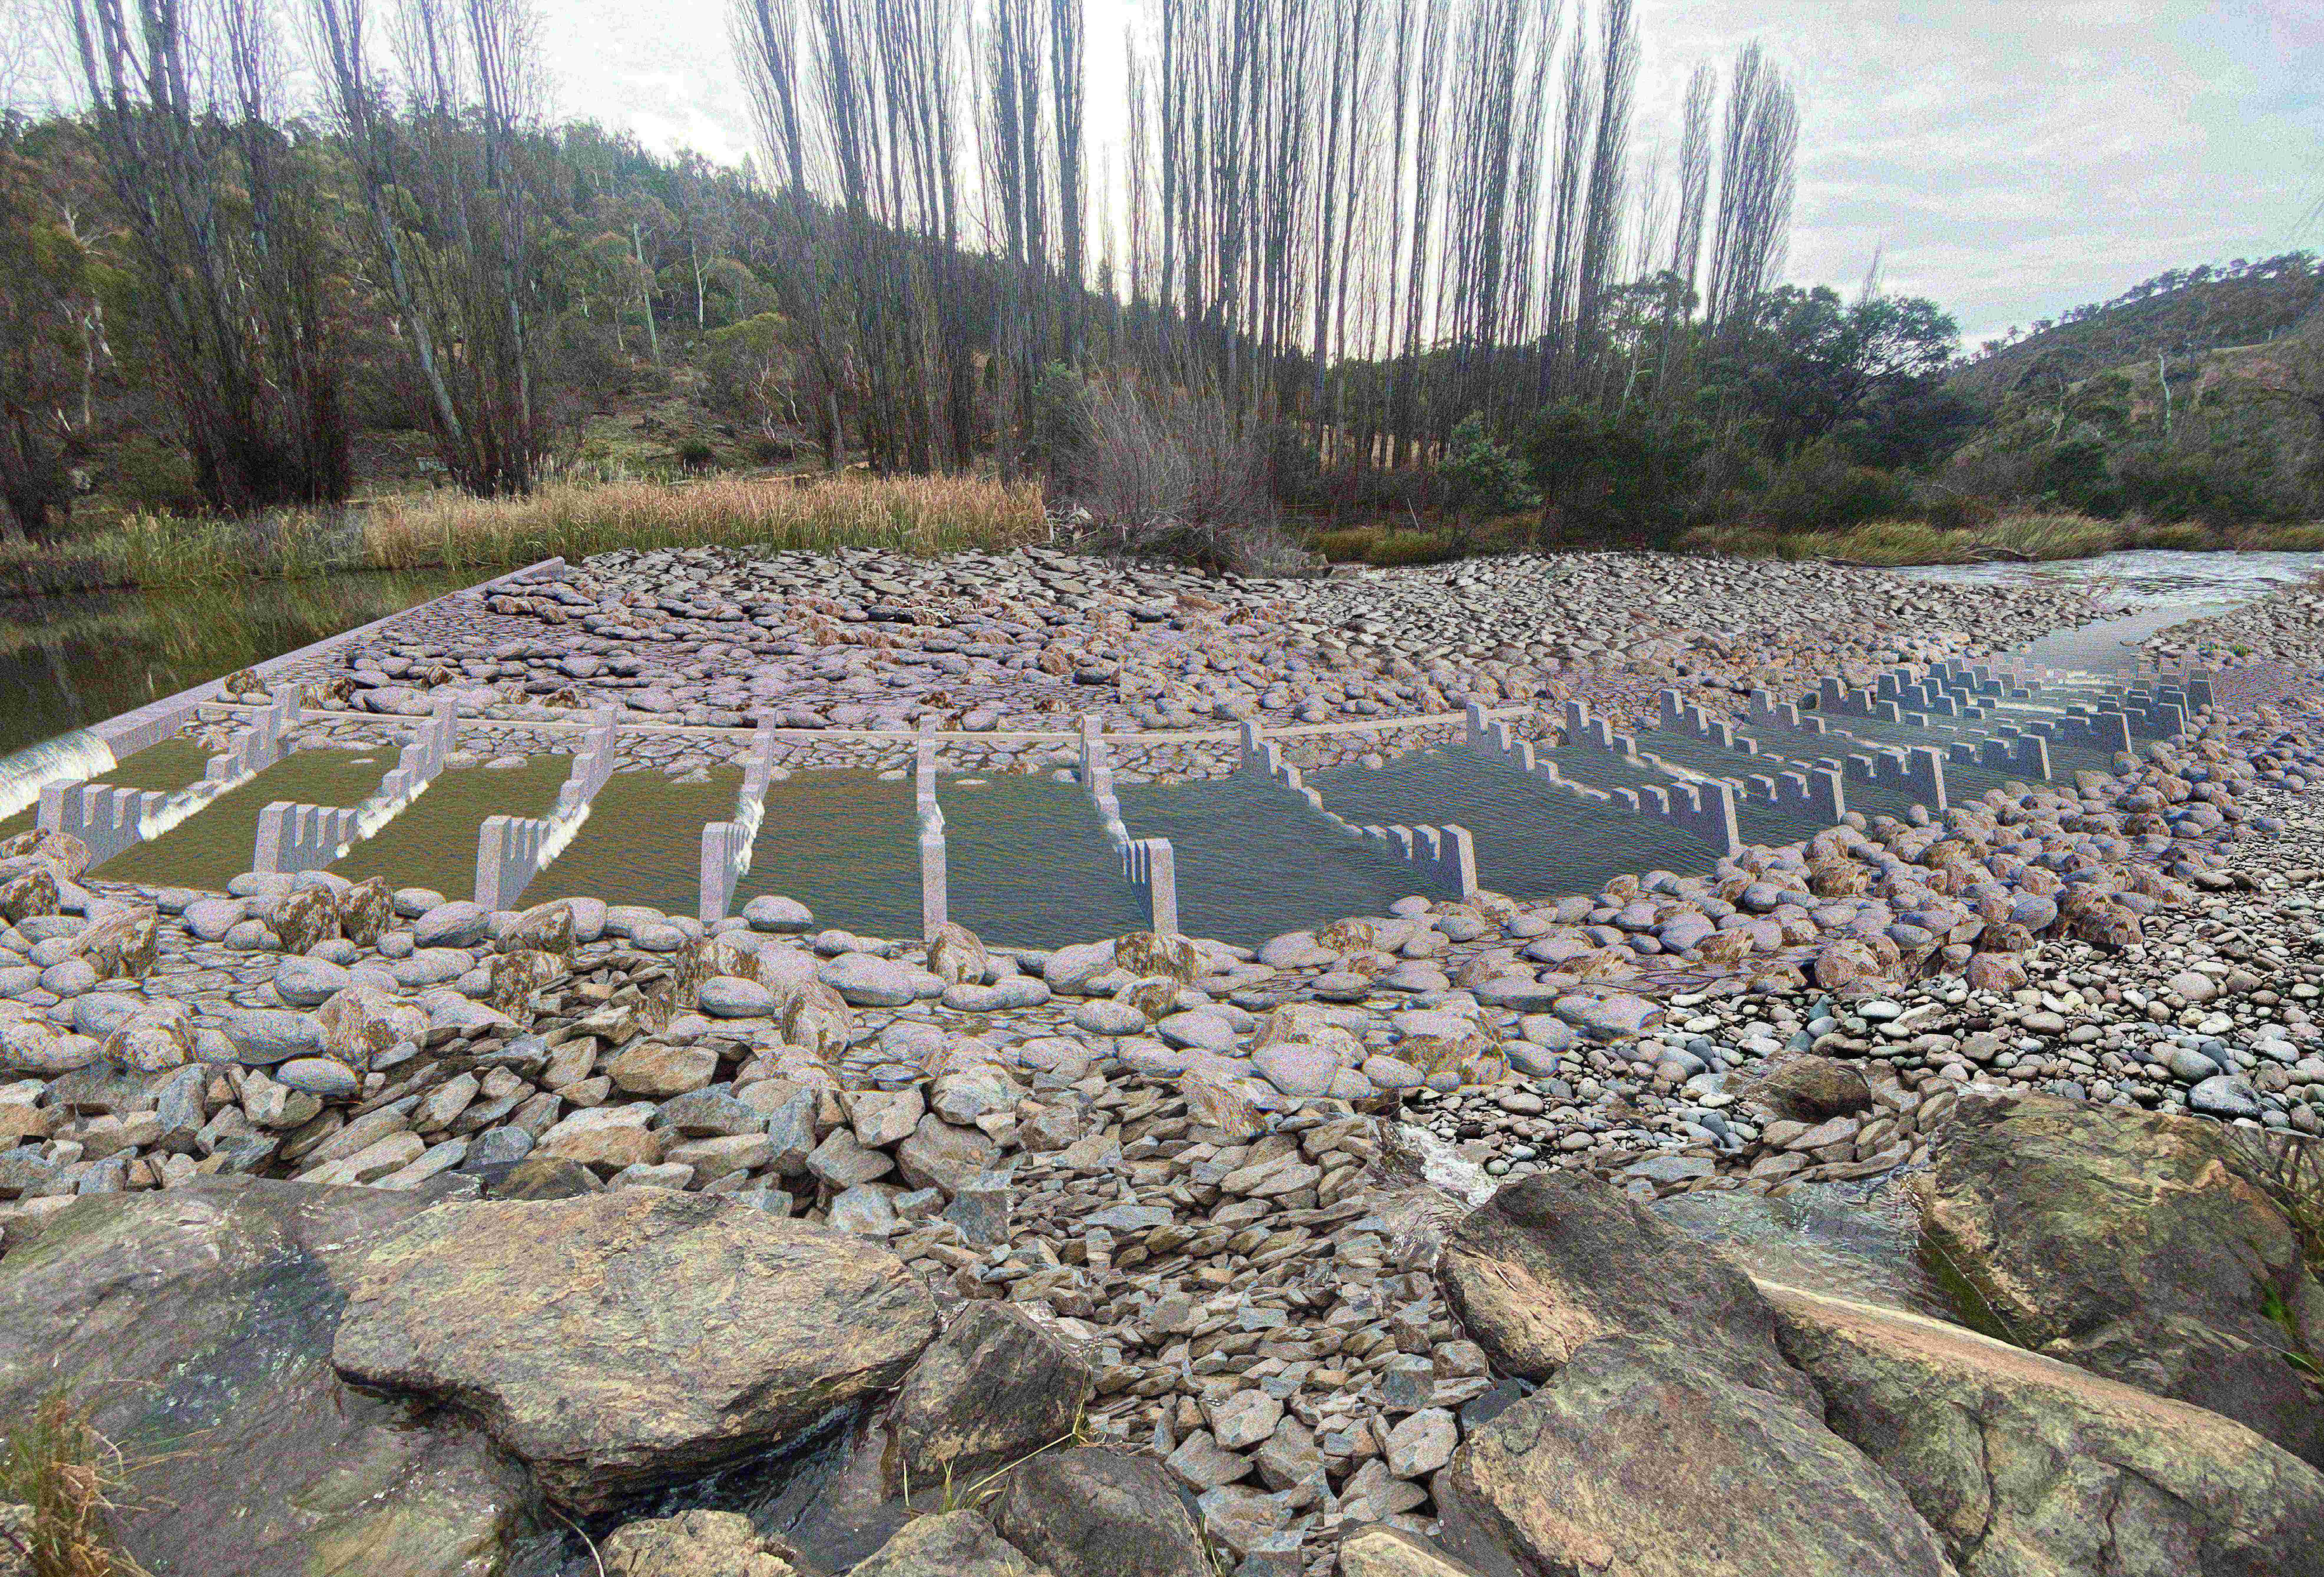 Cooma's ageing weir and fishway to be replaced to improve water for people, native animals alike